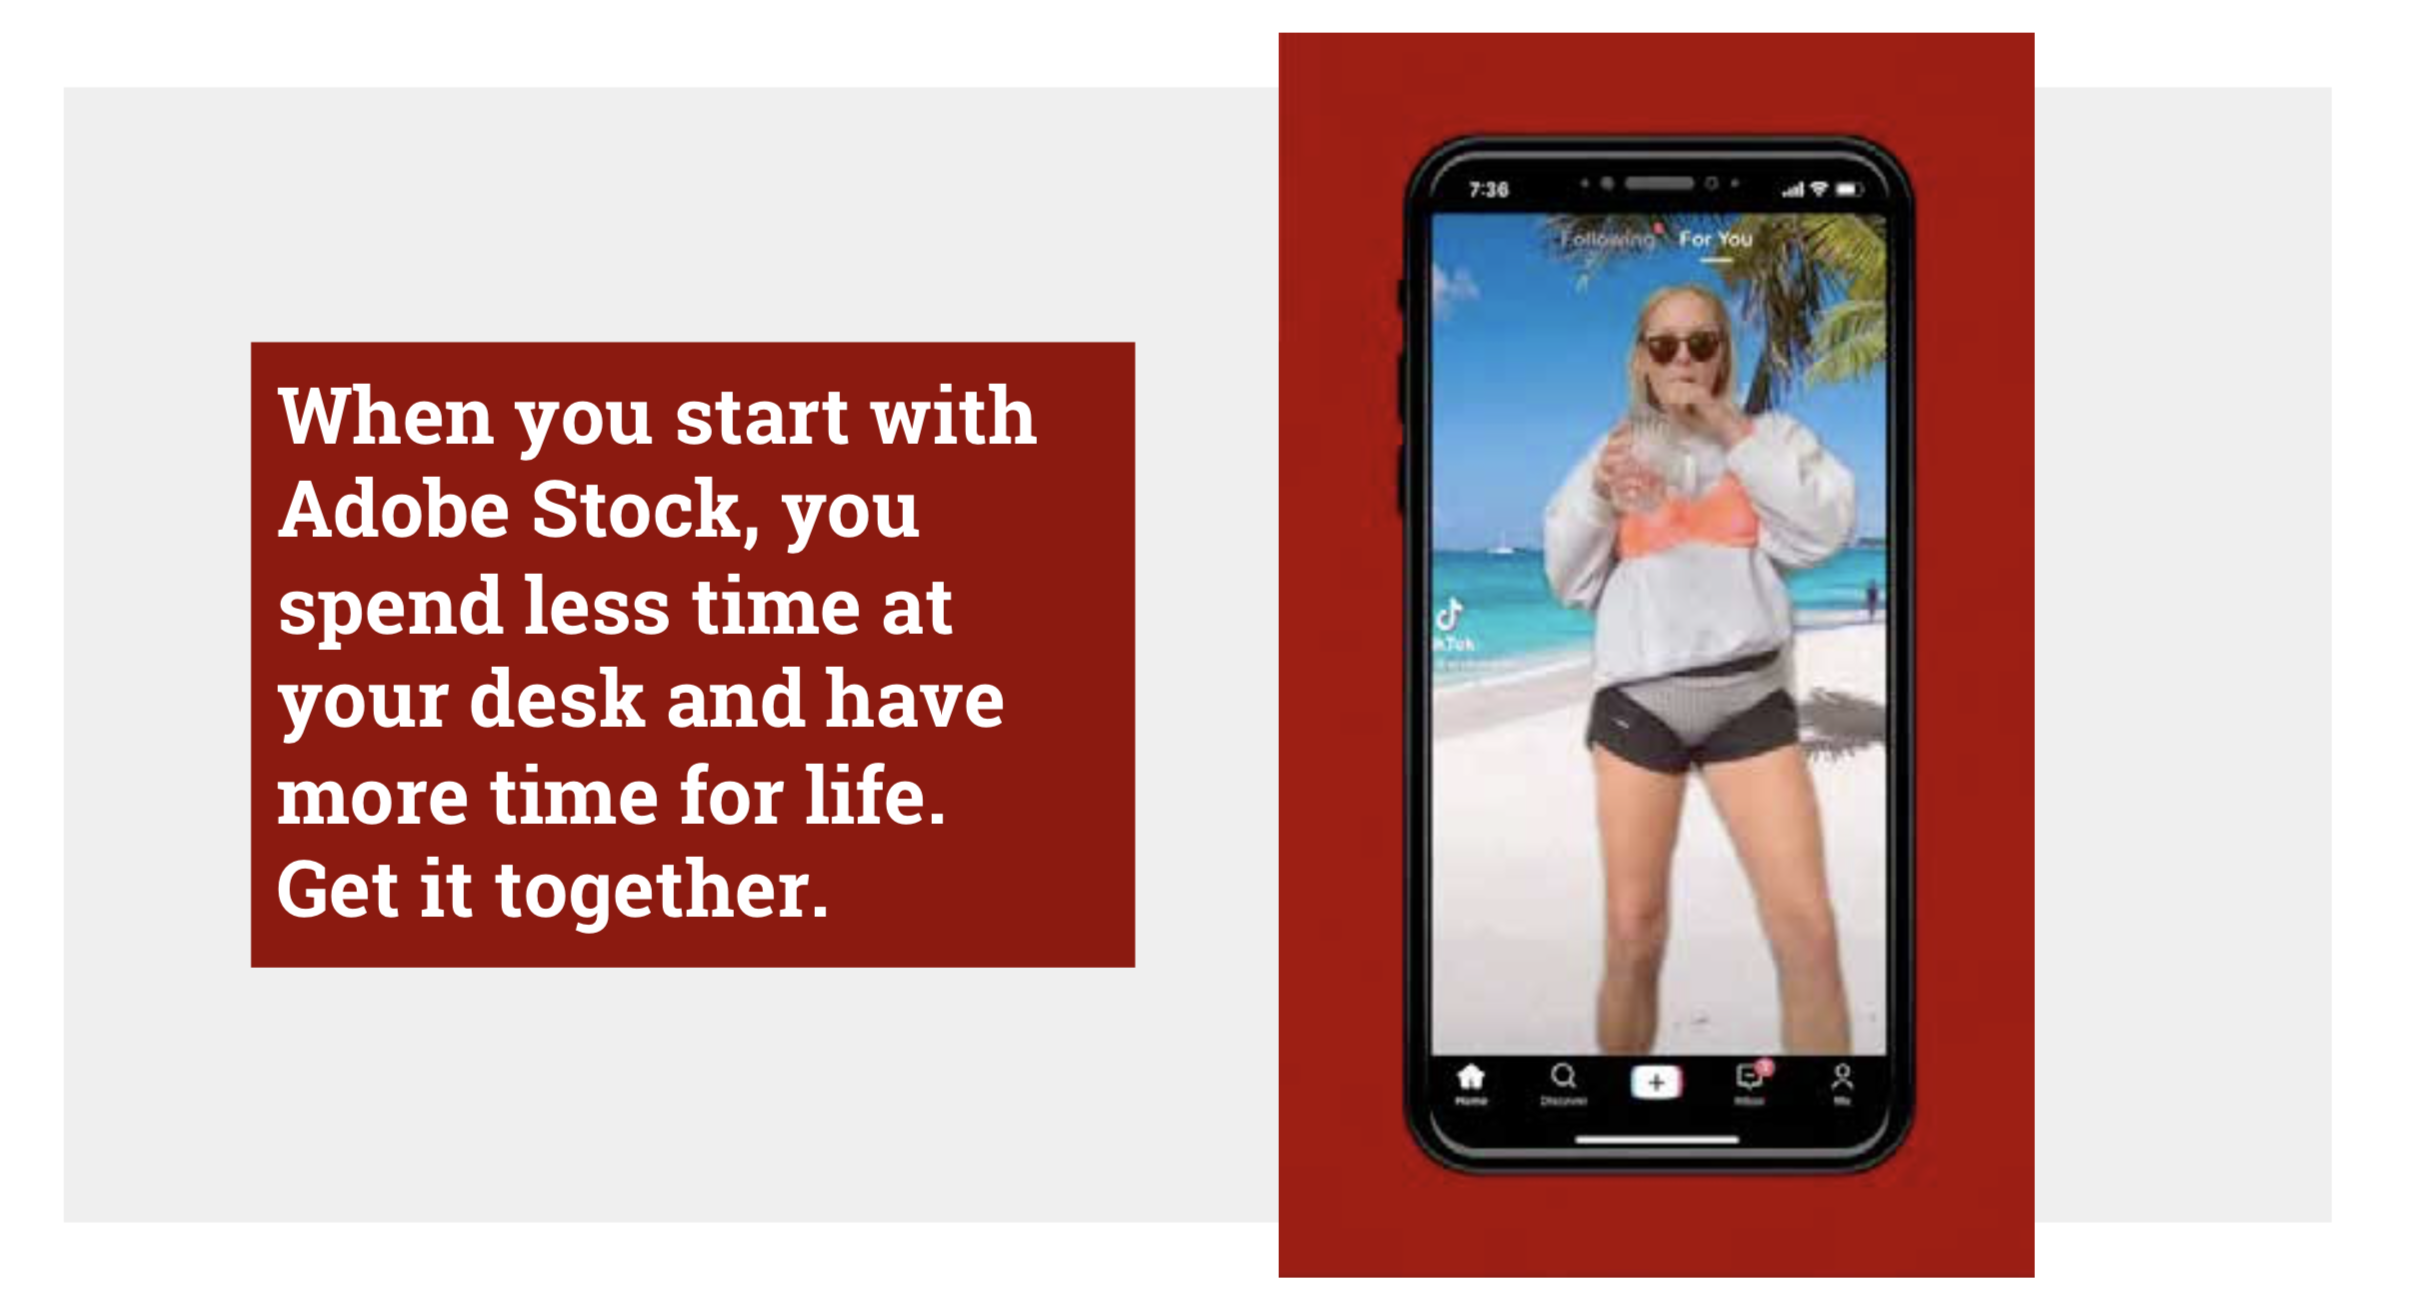 When you start with Adobe Stock, you spend less time at your desk and have more time for life. Get it together. A cell phone displays a photo of a woman wearing a bathing suit on top of shorts and a sweatshirt, and drinking water out of a pitcher.